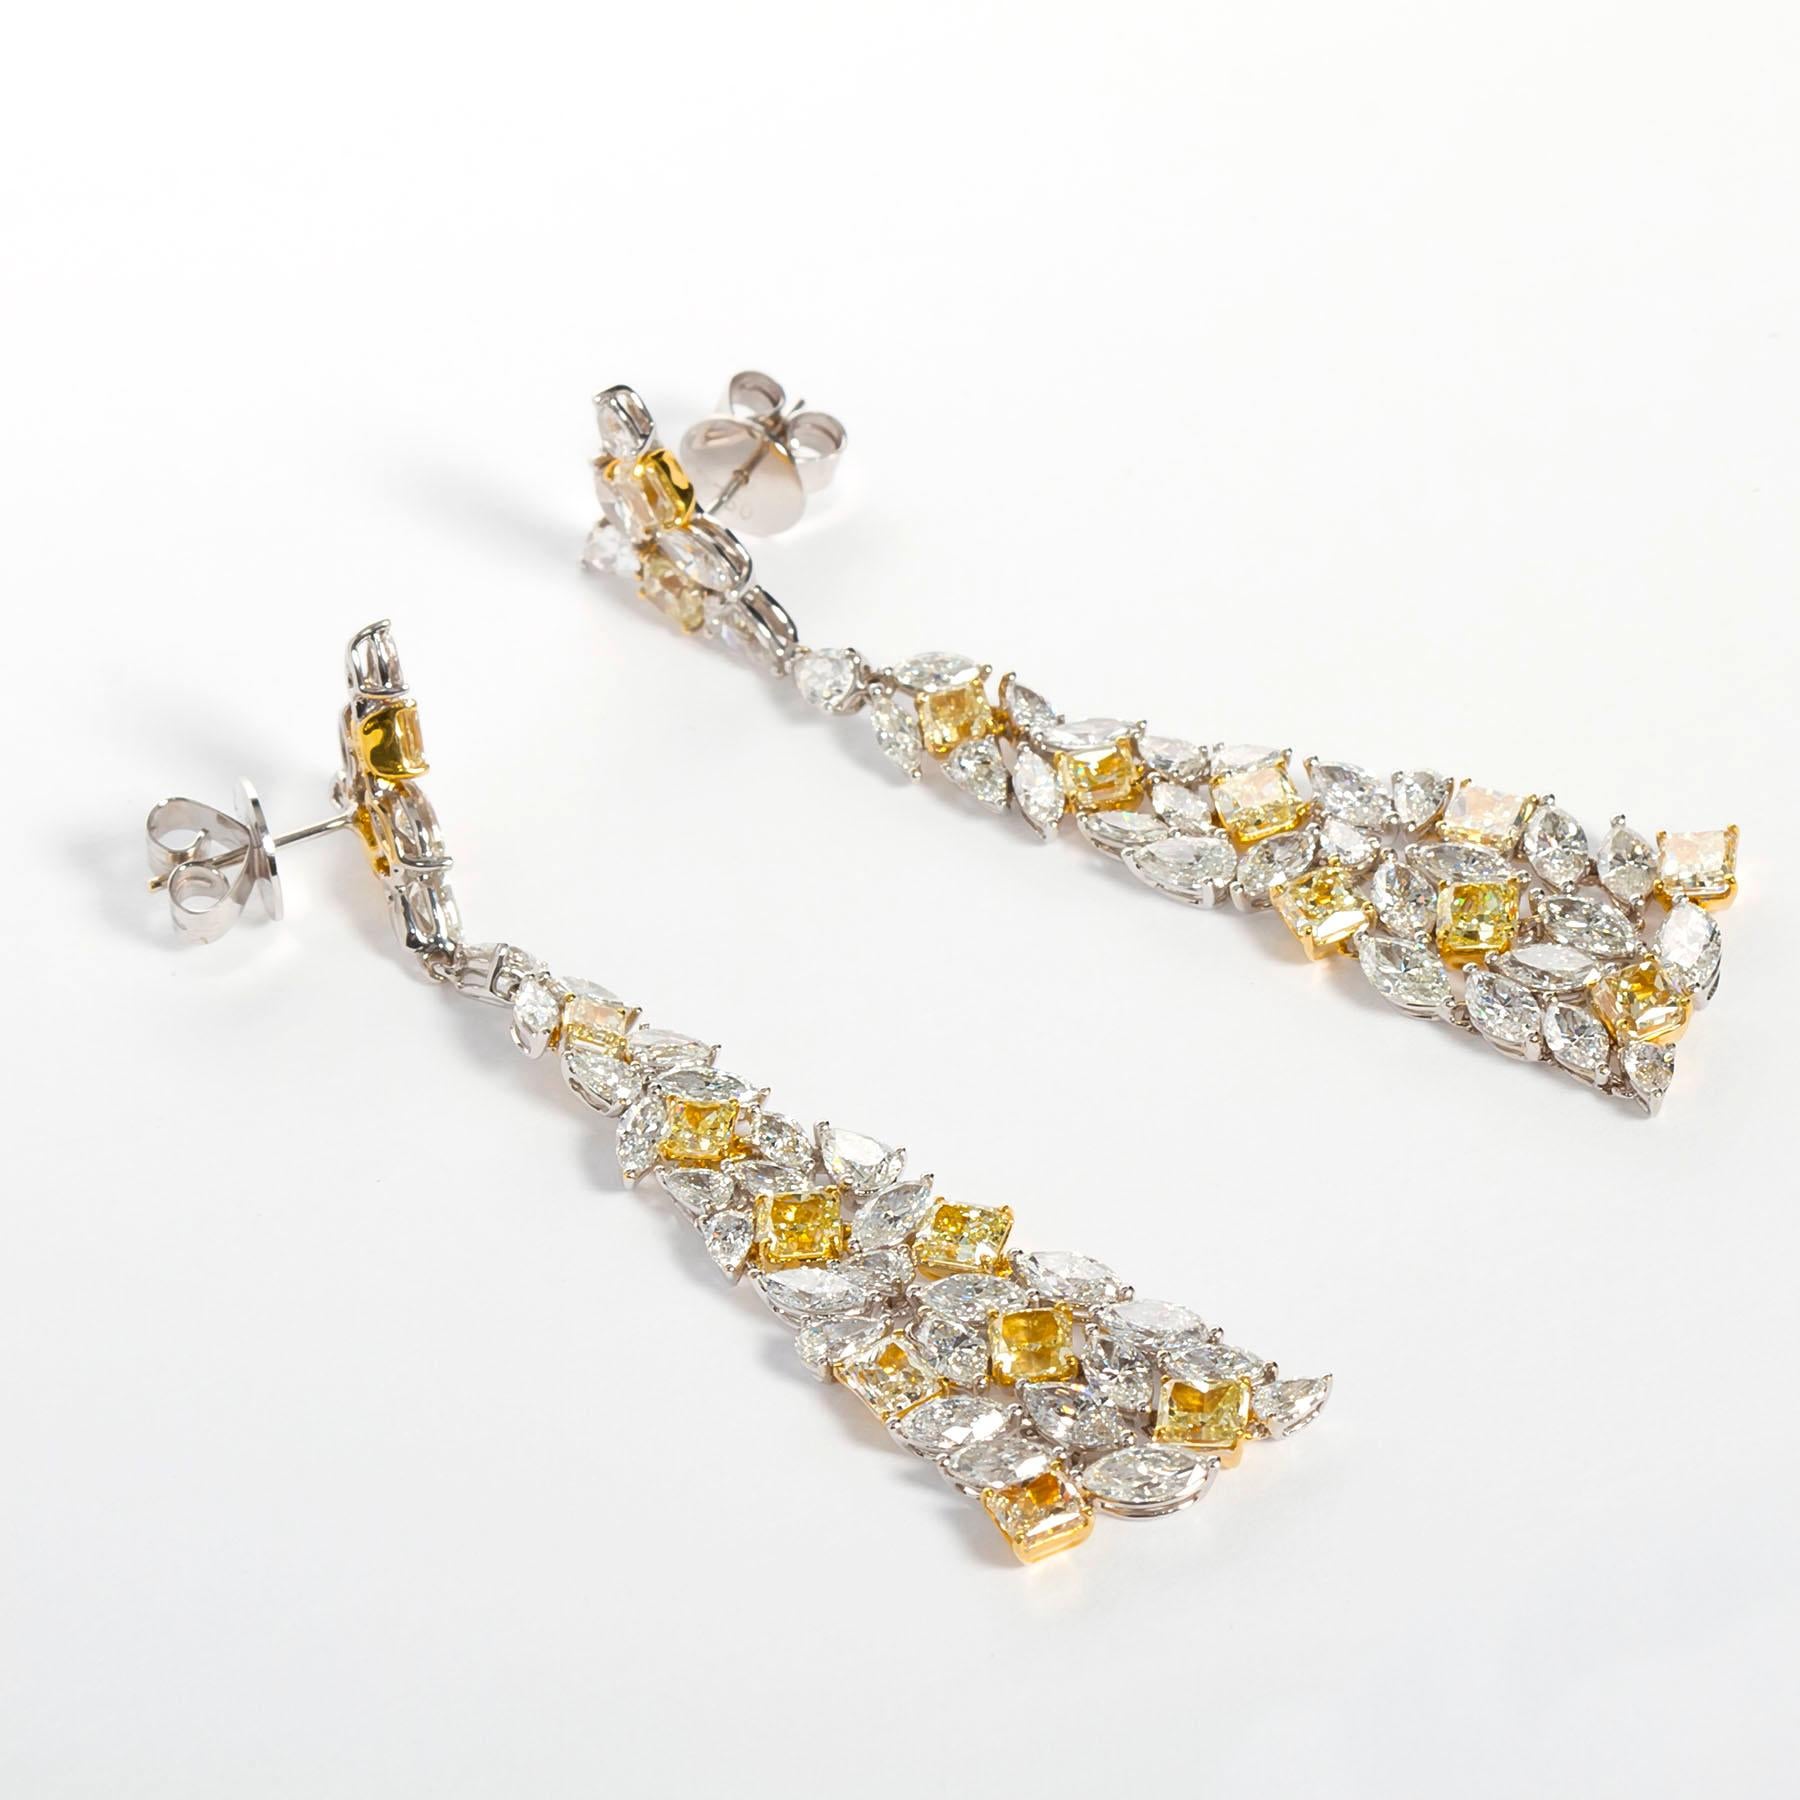 The 18-karat yellow and white gold Mixed Cut White & Yellow Diamond Pyramid Earrings totaling 20.04 carats of diamonds are an exquisite example of fine jewelry craftsmanship, blending luxurious materials with an innovative design. These earrings